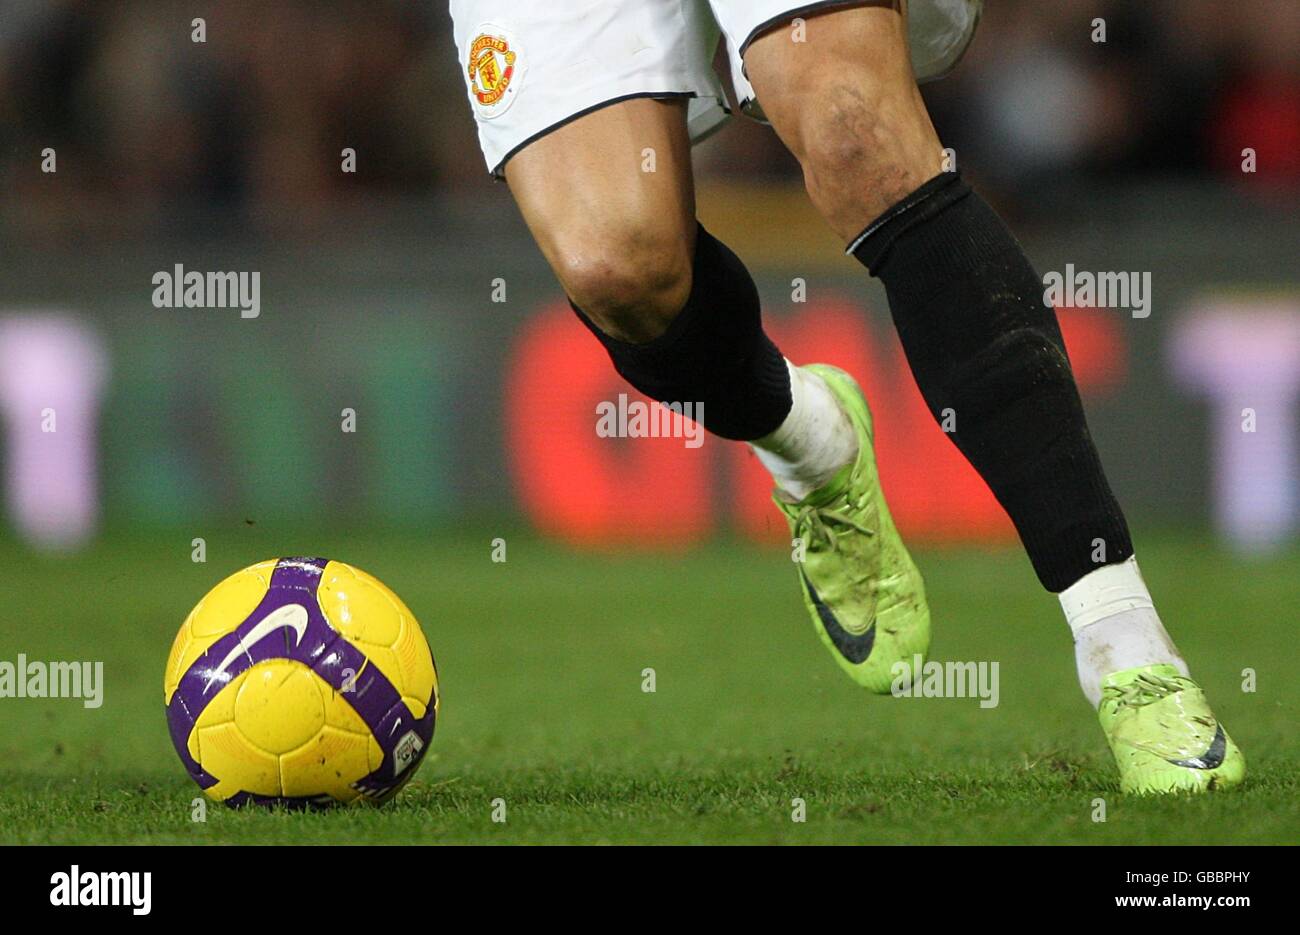 Close up view of Manchester United's Cristiano Ronaldo's green Nike boots  Stock Photo - Alamy